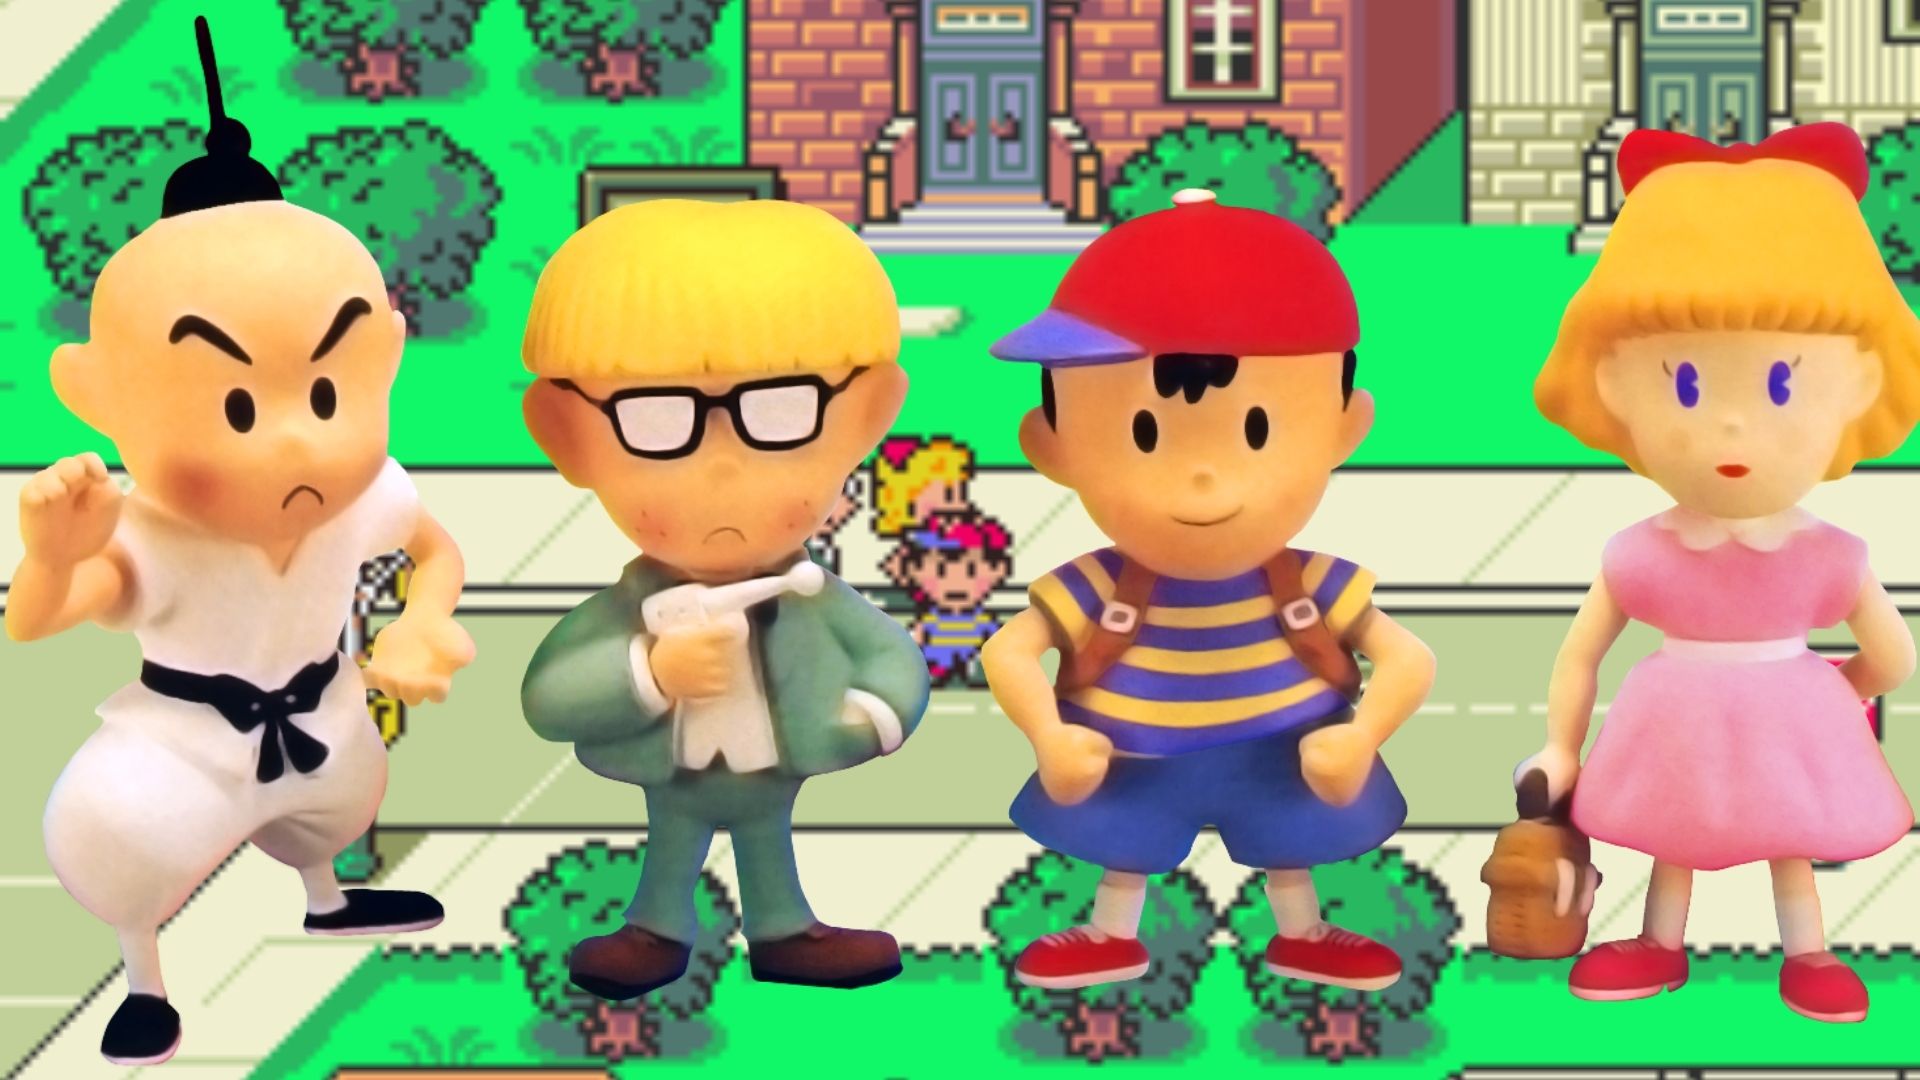 Ness Earthbound 